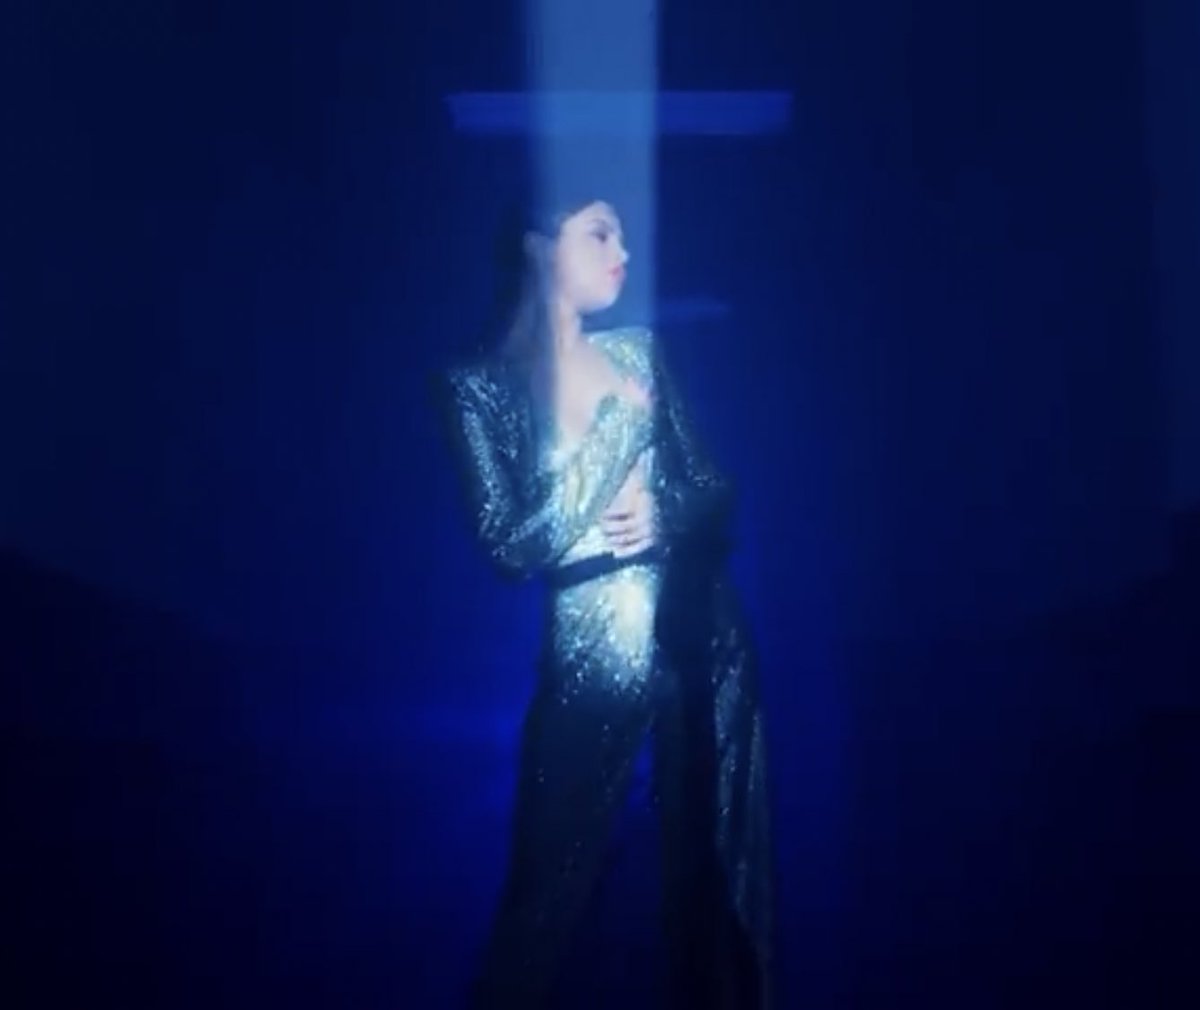 And since Selena’s Wolves character also fits the profile of the female singer in Abel’s Blinding Lights MV, then this explains his lyrics for that video as well to explain how she’s his light.